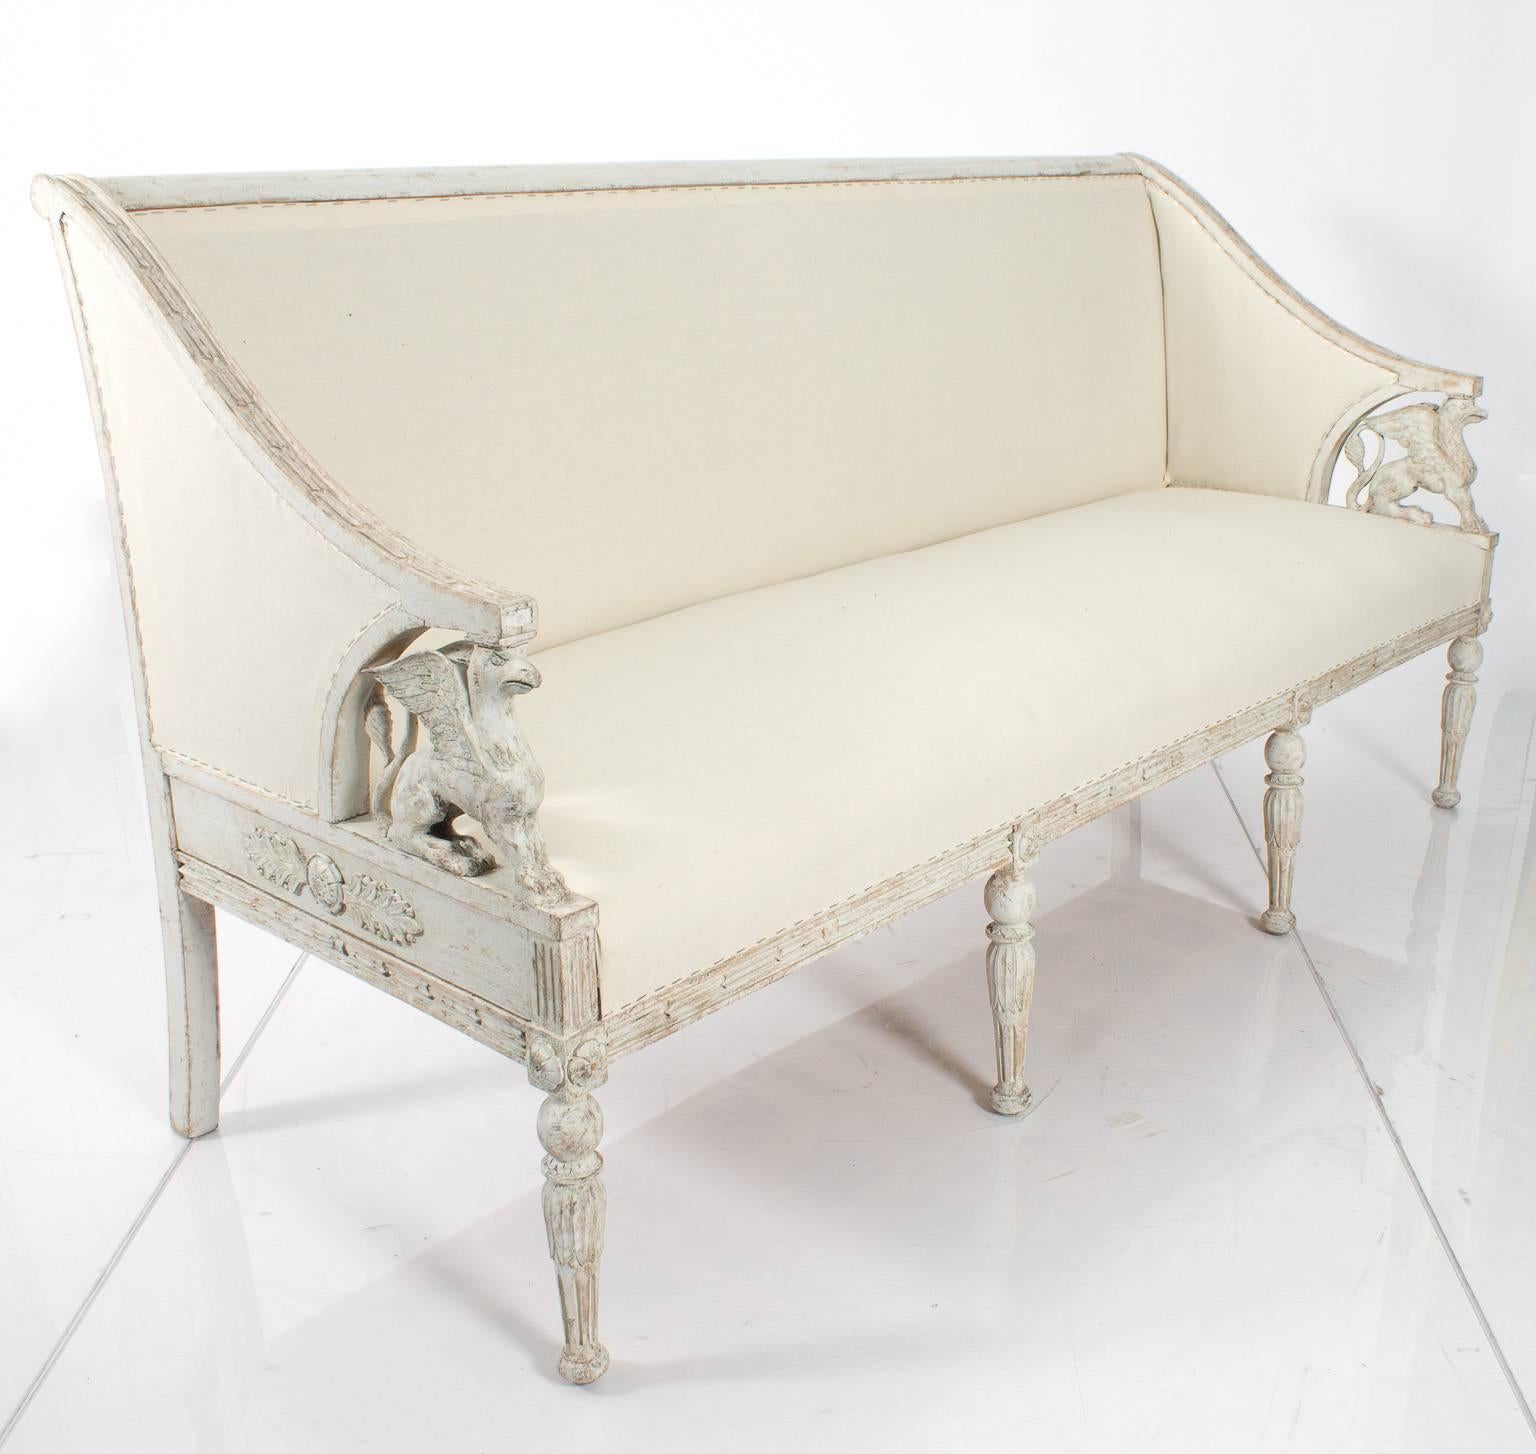 19th century Swedish white-painted Gustavian style sofa straight back armrests carved with griffins with rounded legs.